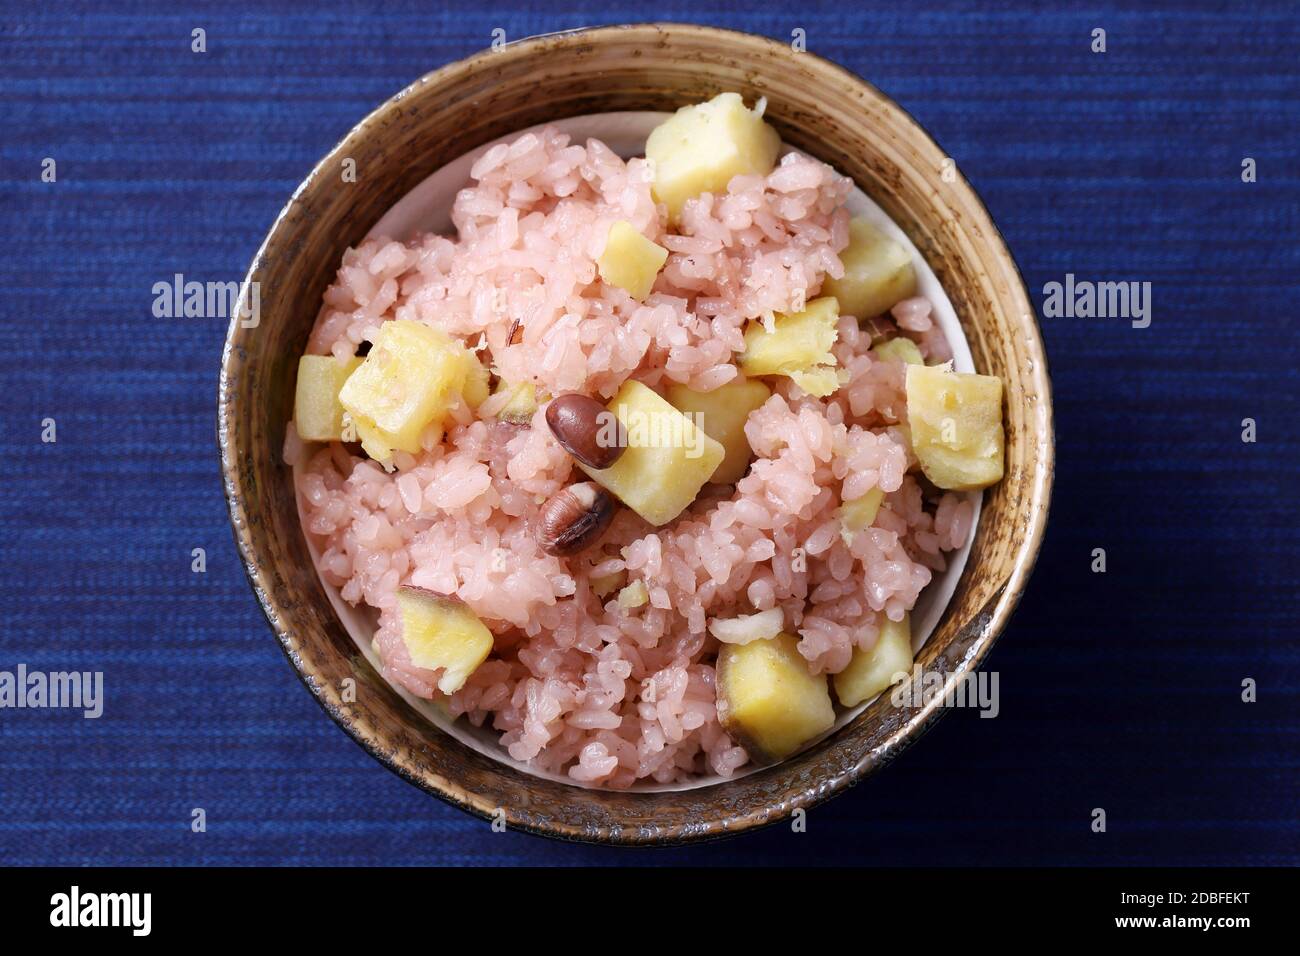 Japanese cooked sekihan rice with red beans in a bowl on table, top view Stock Photo